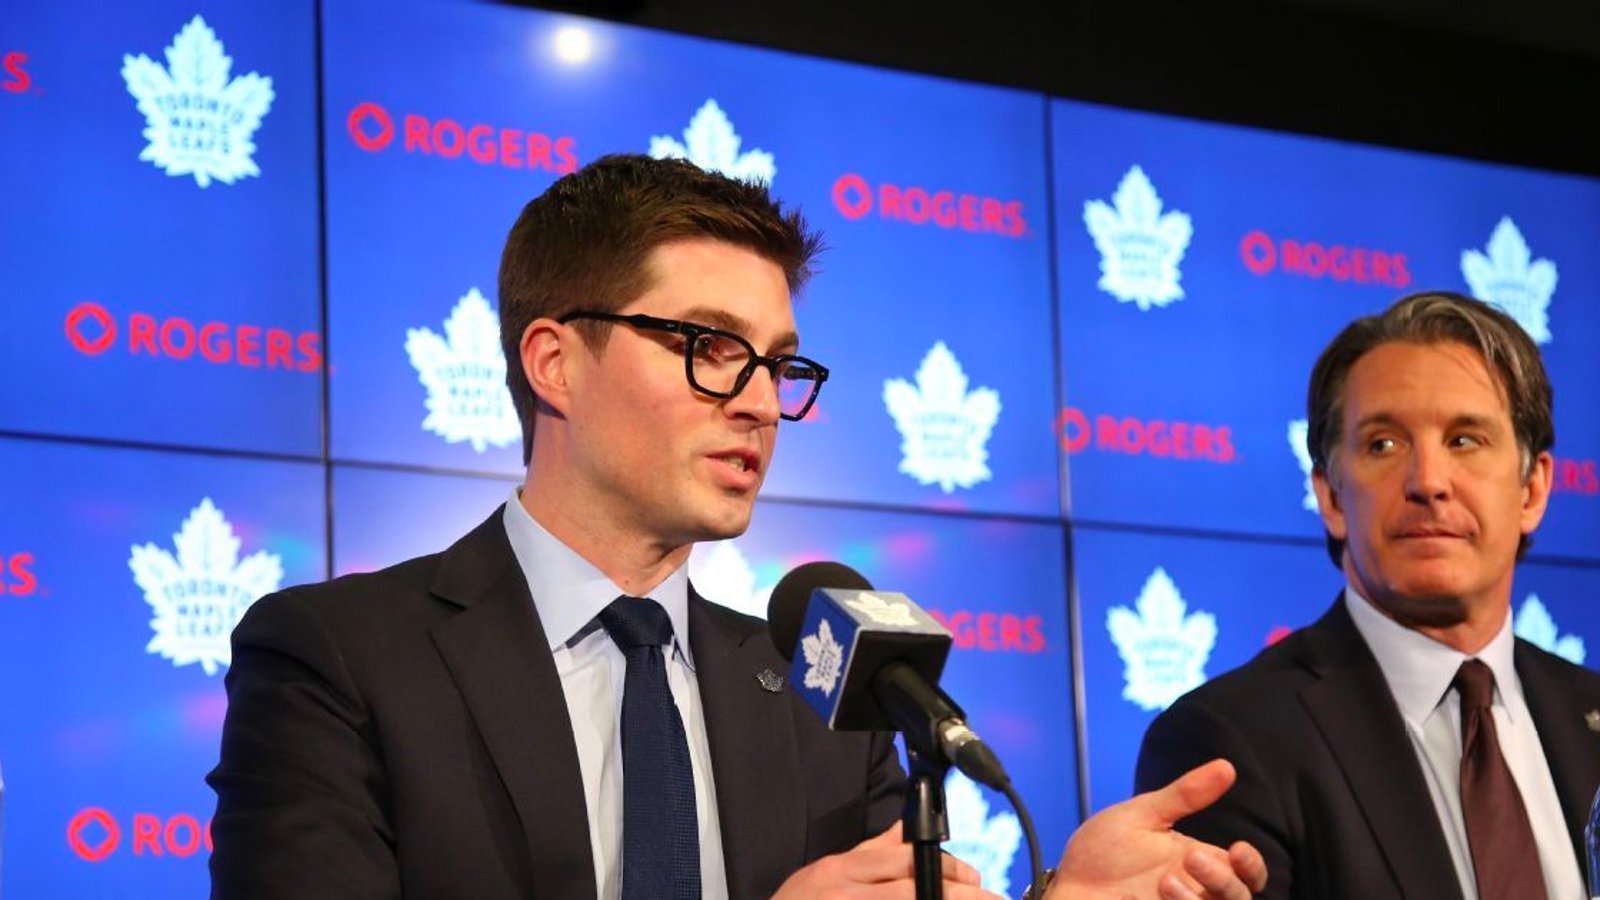 Report: Leafs to pony up $50 million to gain competitive advantage